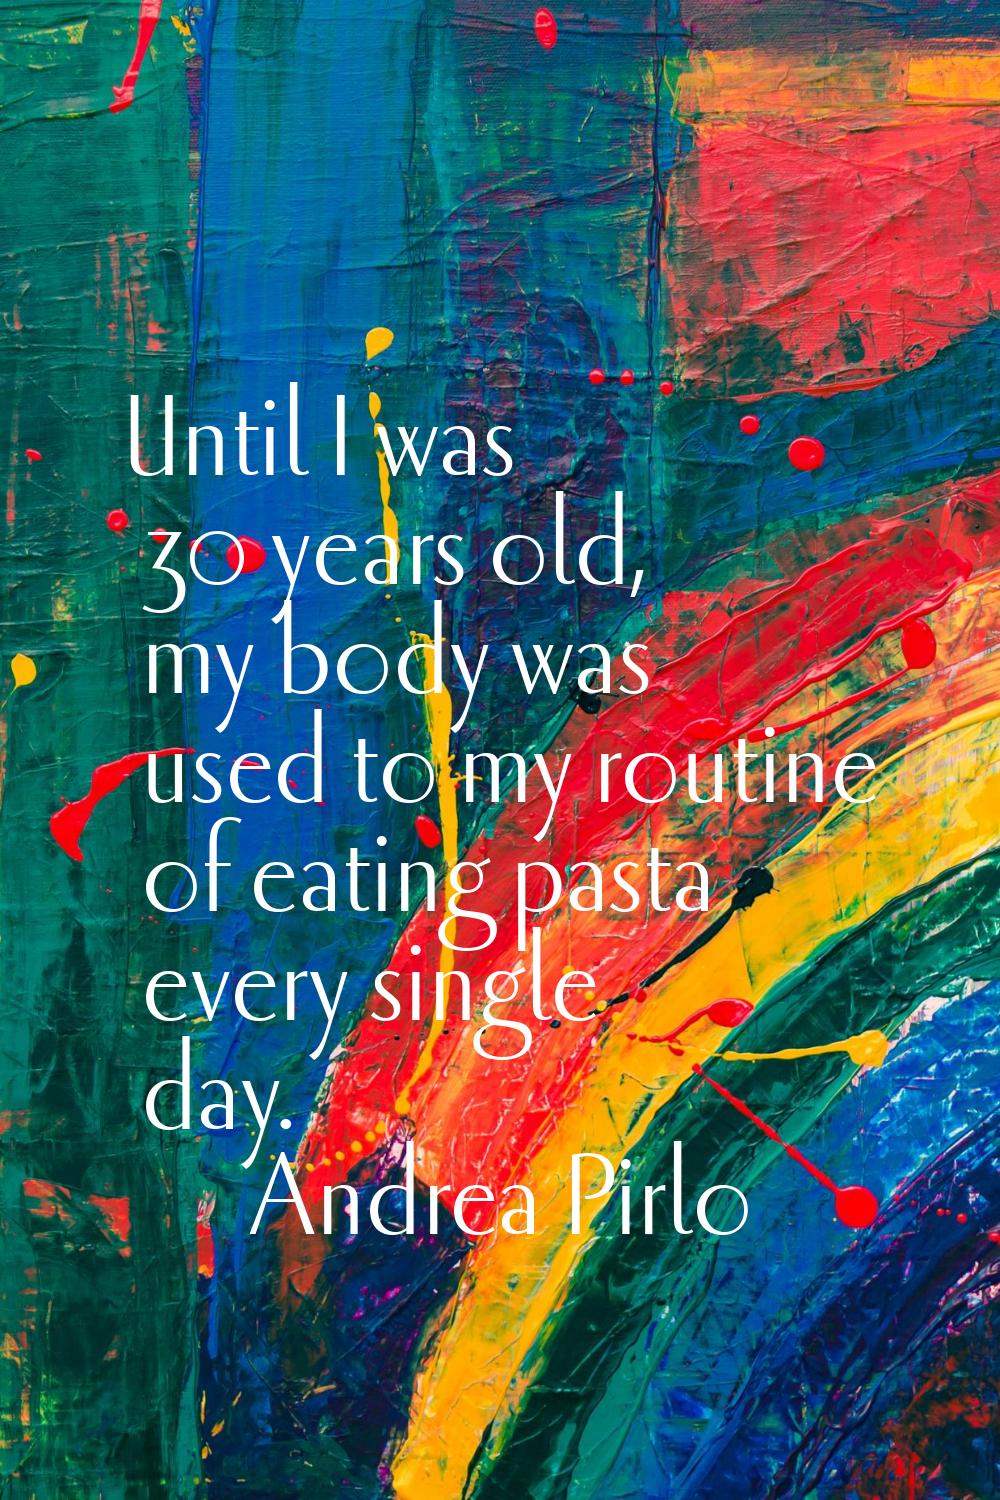 Until I was 30 years old, my body was used to my routine of eating pasta every single day.